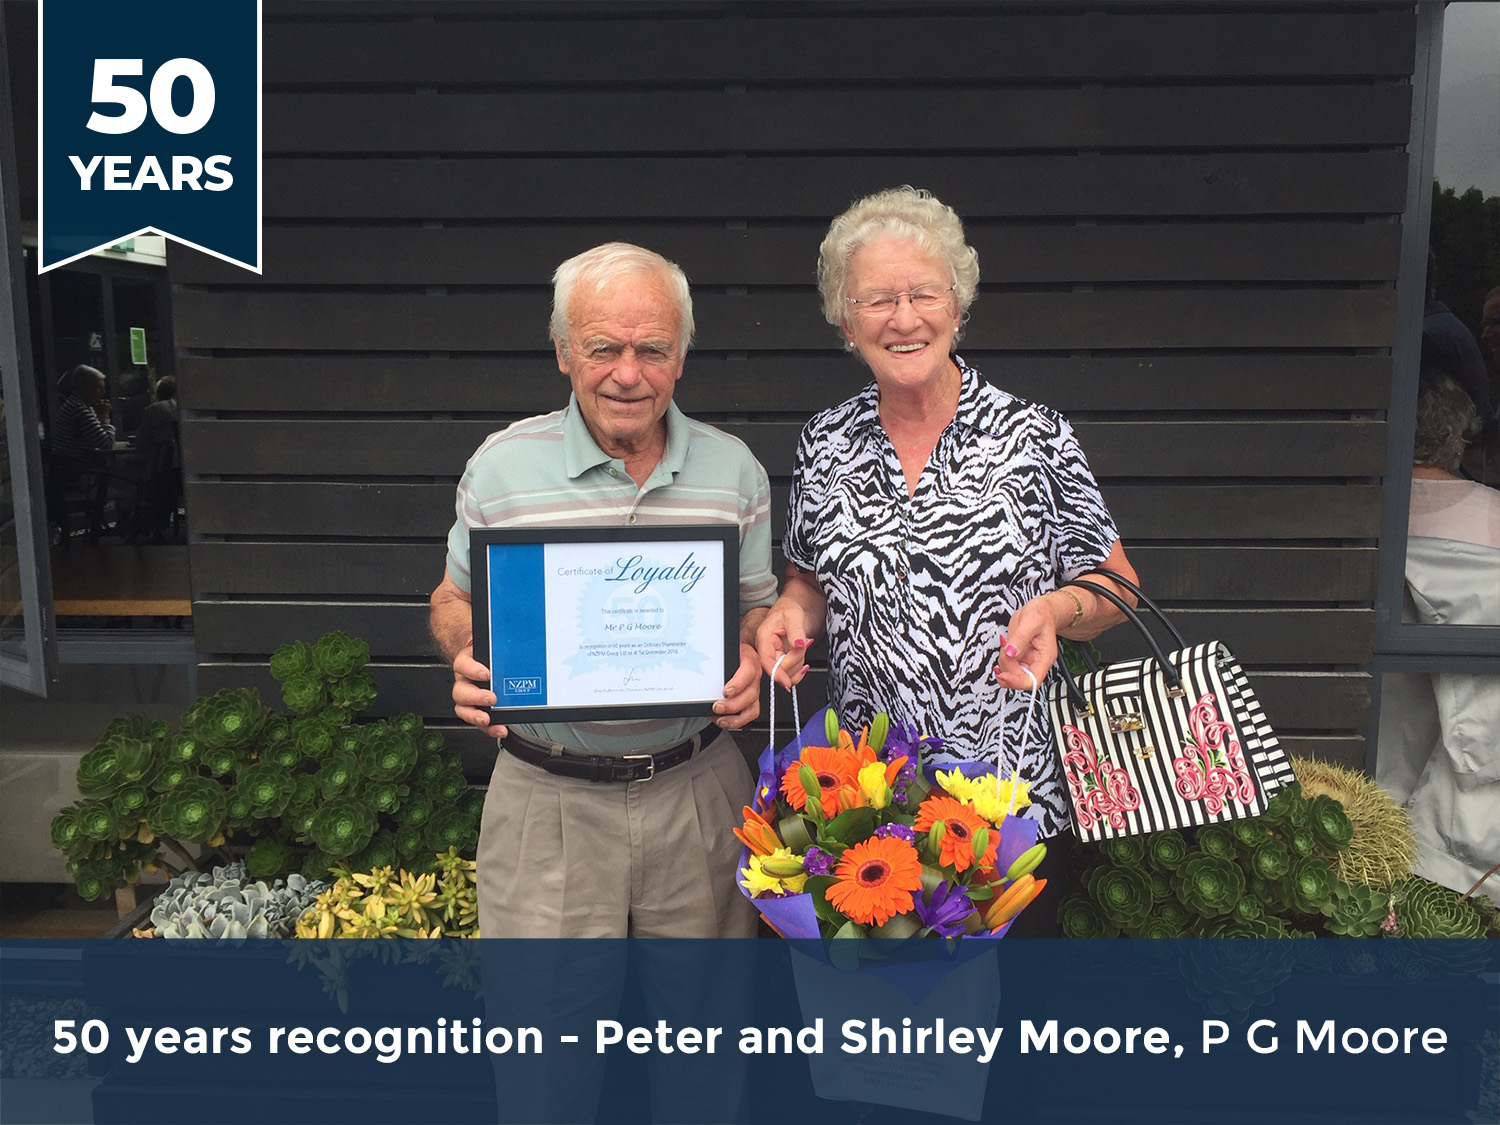 P G Moore 50 year recognition